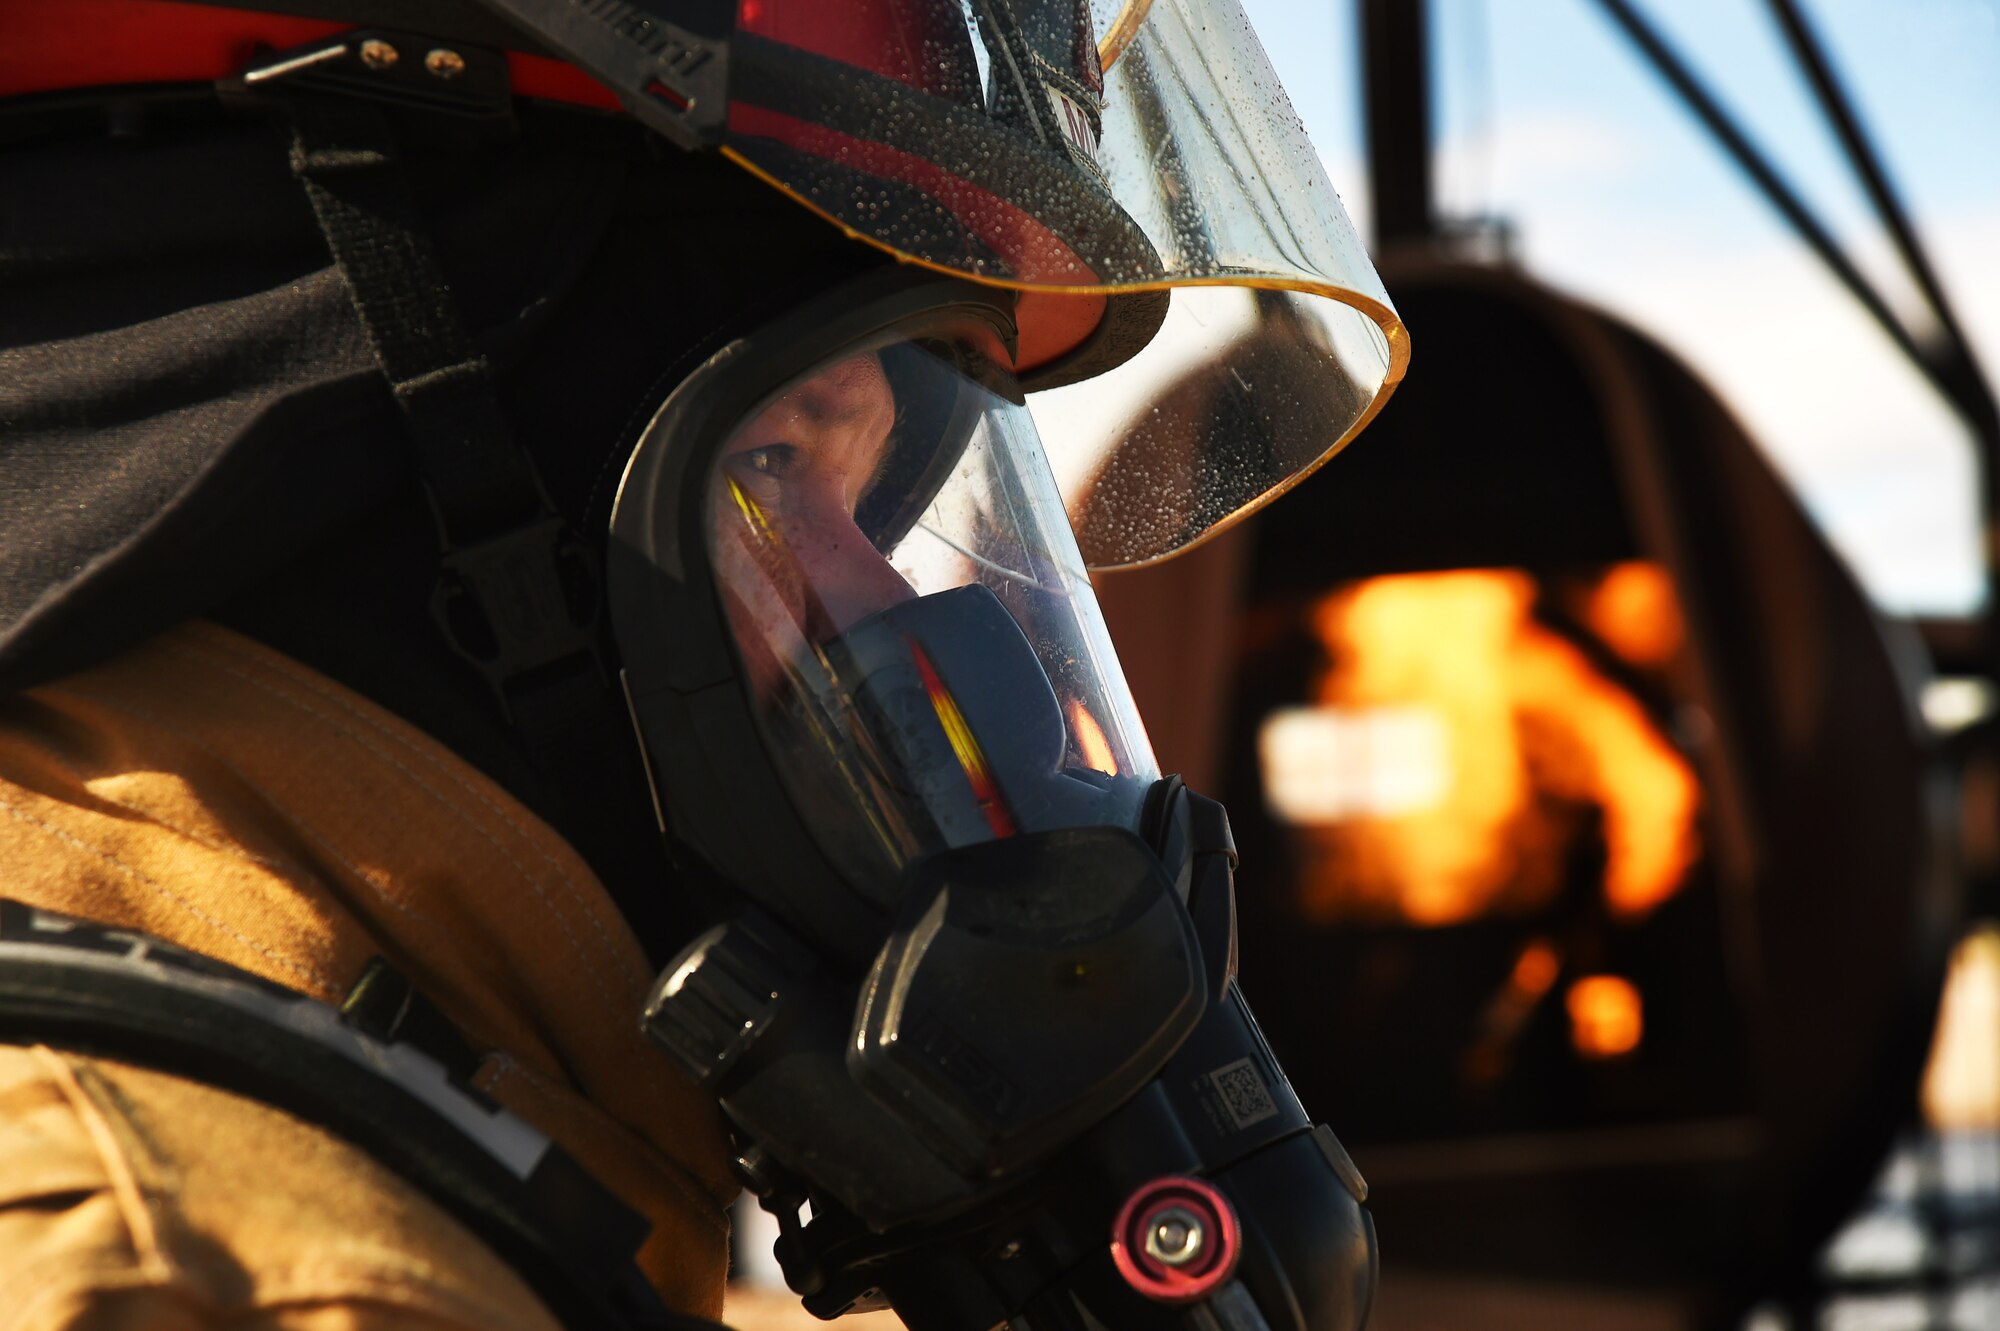 An Airman assigned to the 99th Civil Engineer Squadron Fire Protection Flight peers at the training instructor before beginning an aircraft live fire training exercise March 23, 2017, at Nellis Air Force Base, Nev. Firefighters are required to complete the exercise semi-annually in order to stay current with training requirements. (U.S. Air Force photo/Airman 1st Class James Thompson) 